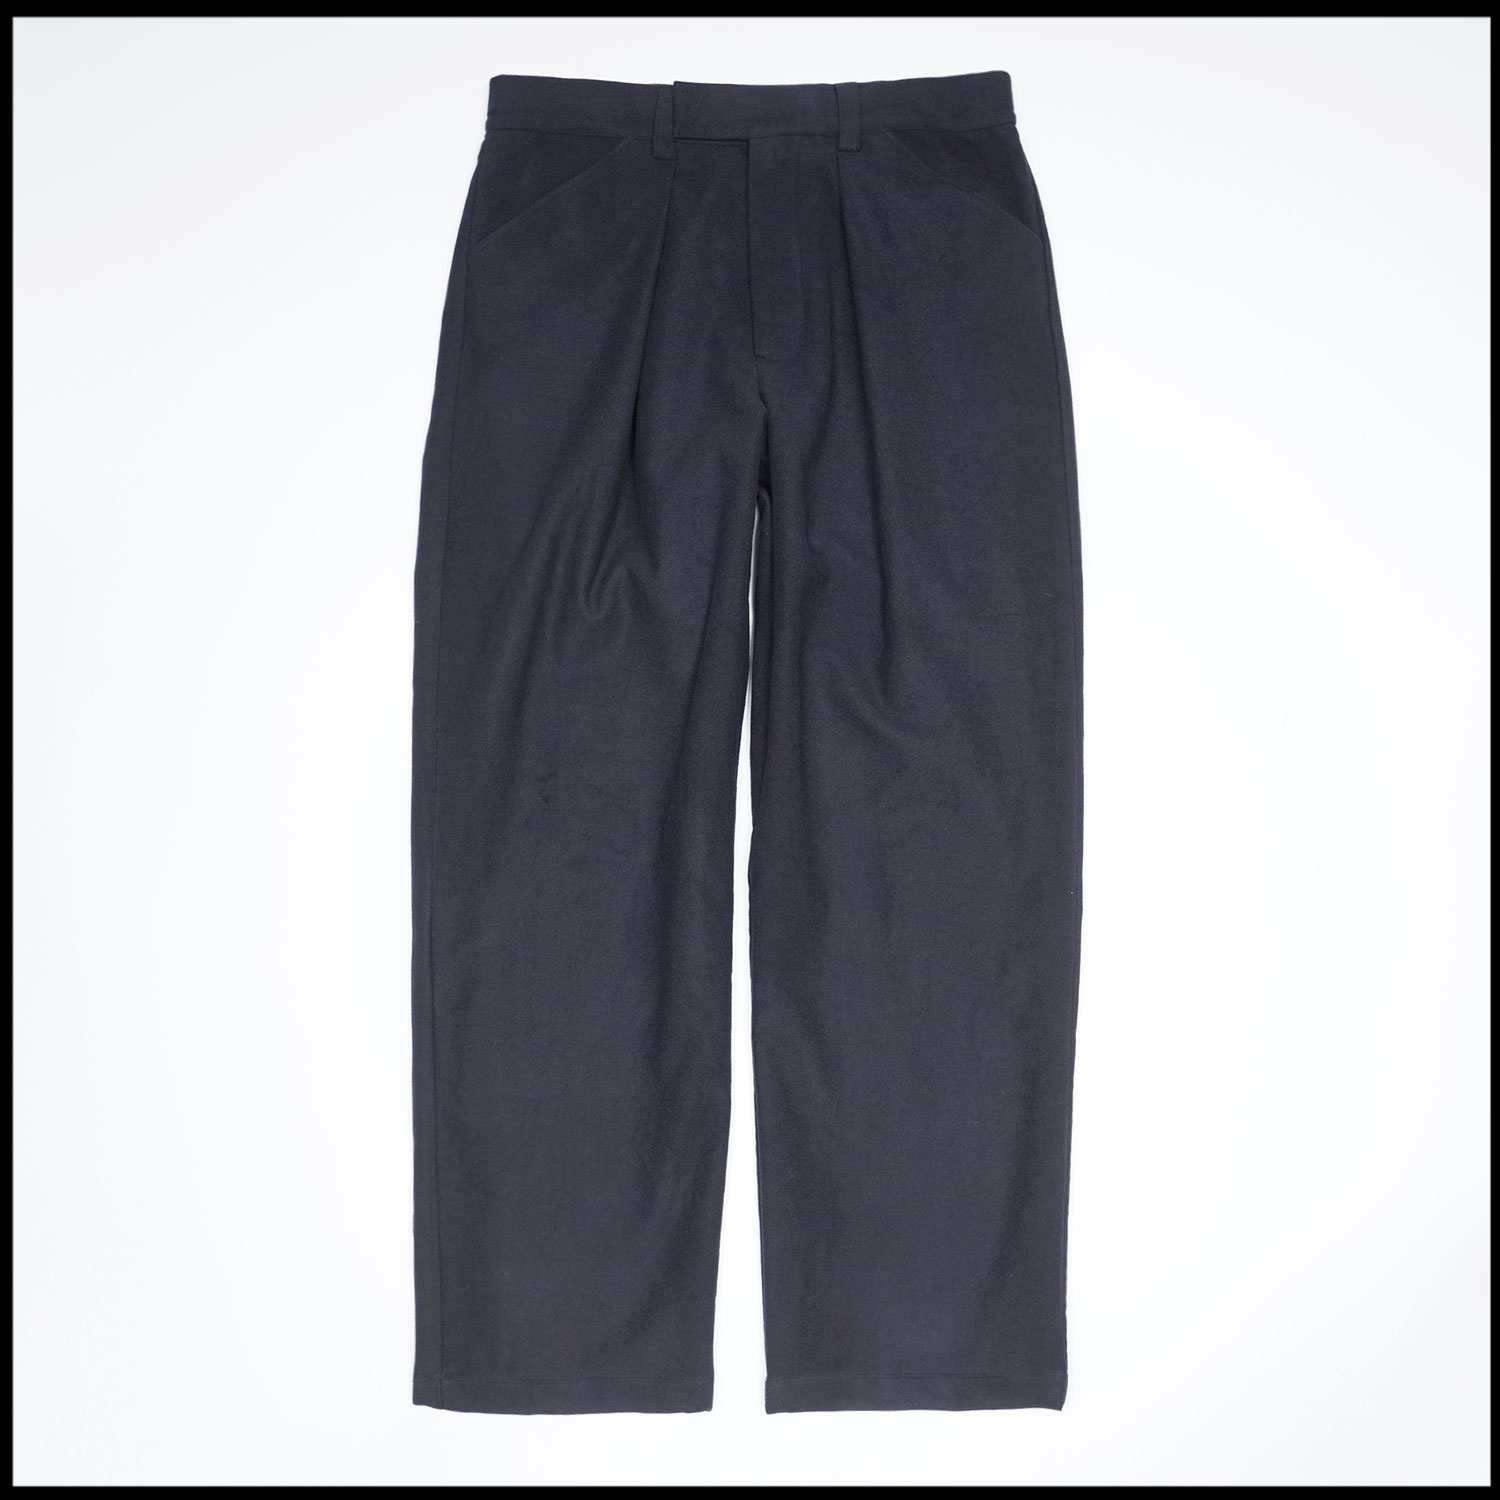 CHINO Pants in Midnight blue color by Arpenteur